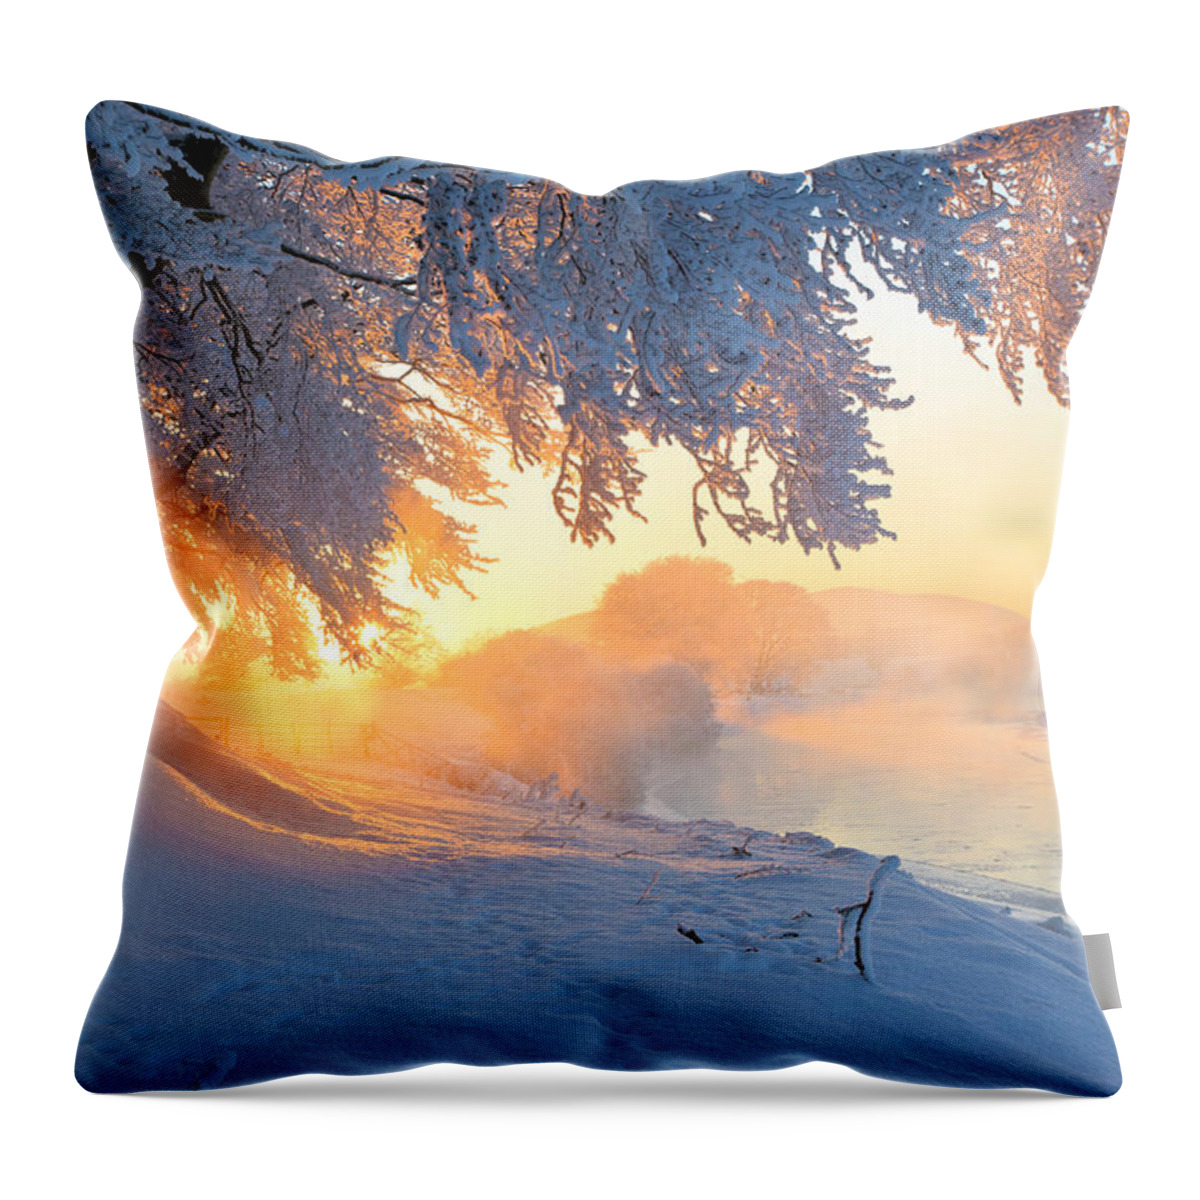 Tranquility Throw Pillow featuring the photograph Icy River At Sunset With Frost Smoke by Simon Butterworth